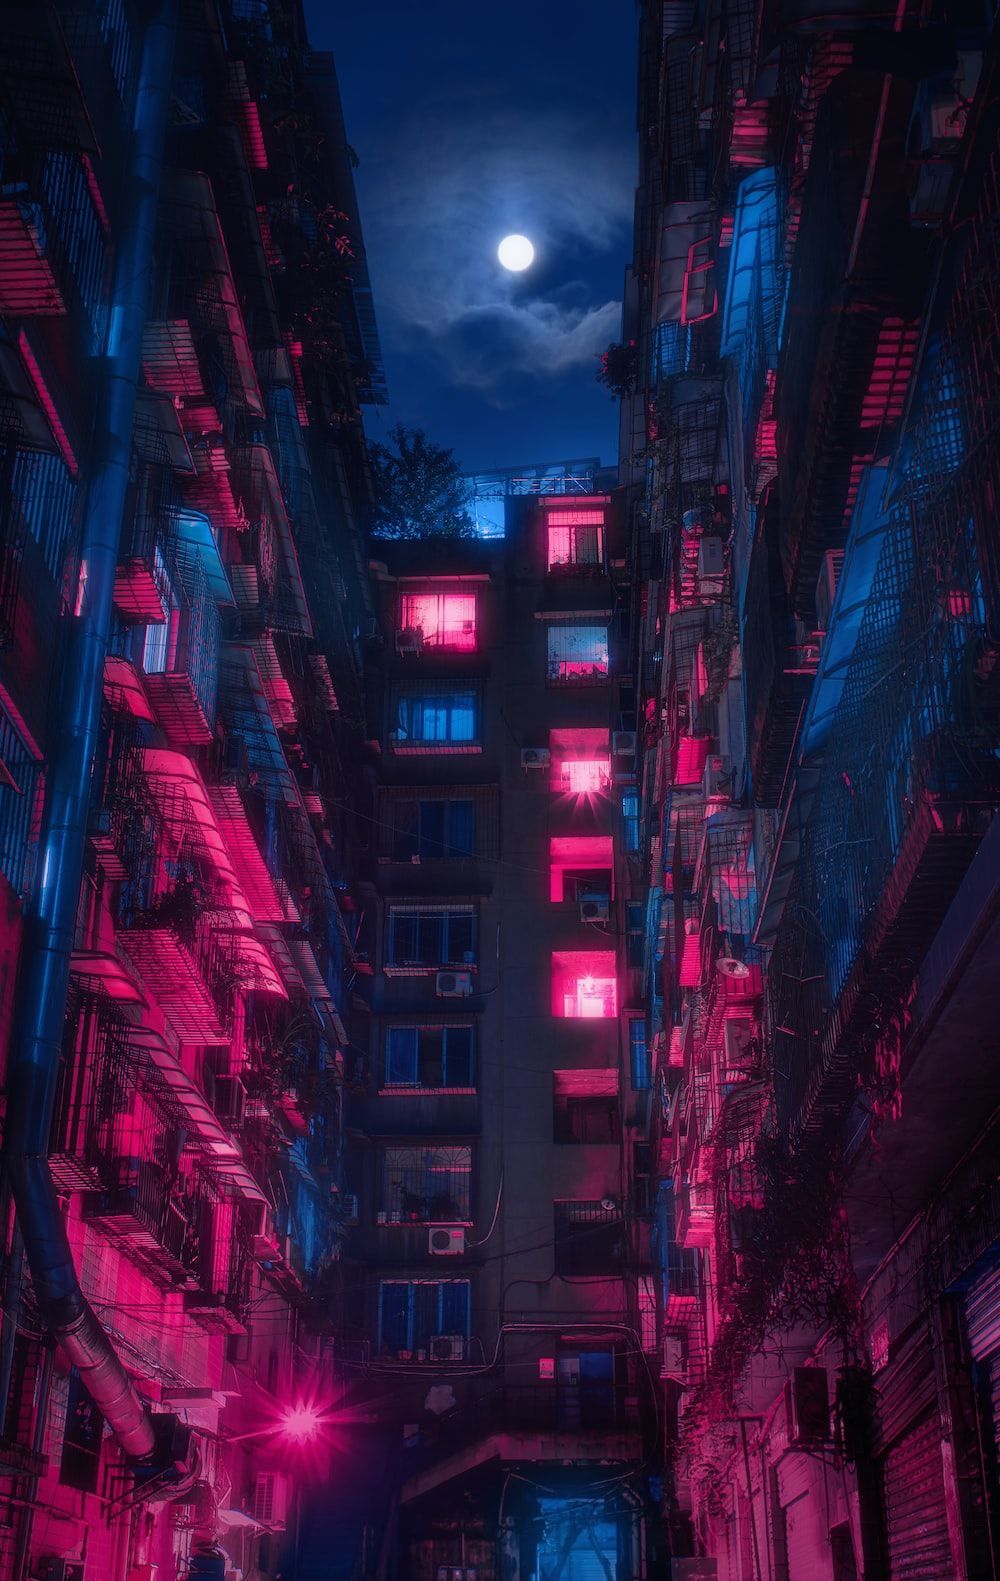 A city street with neon lights and buildings - City, Cyberpunk, punk, 3D, neon pink